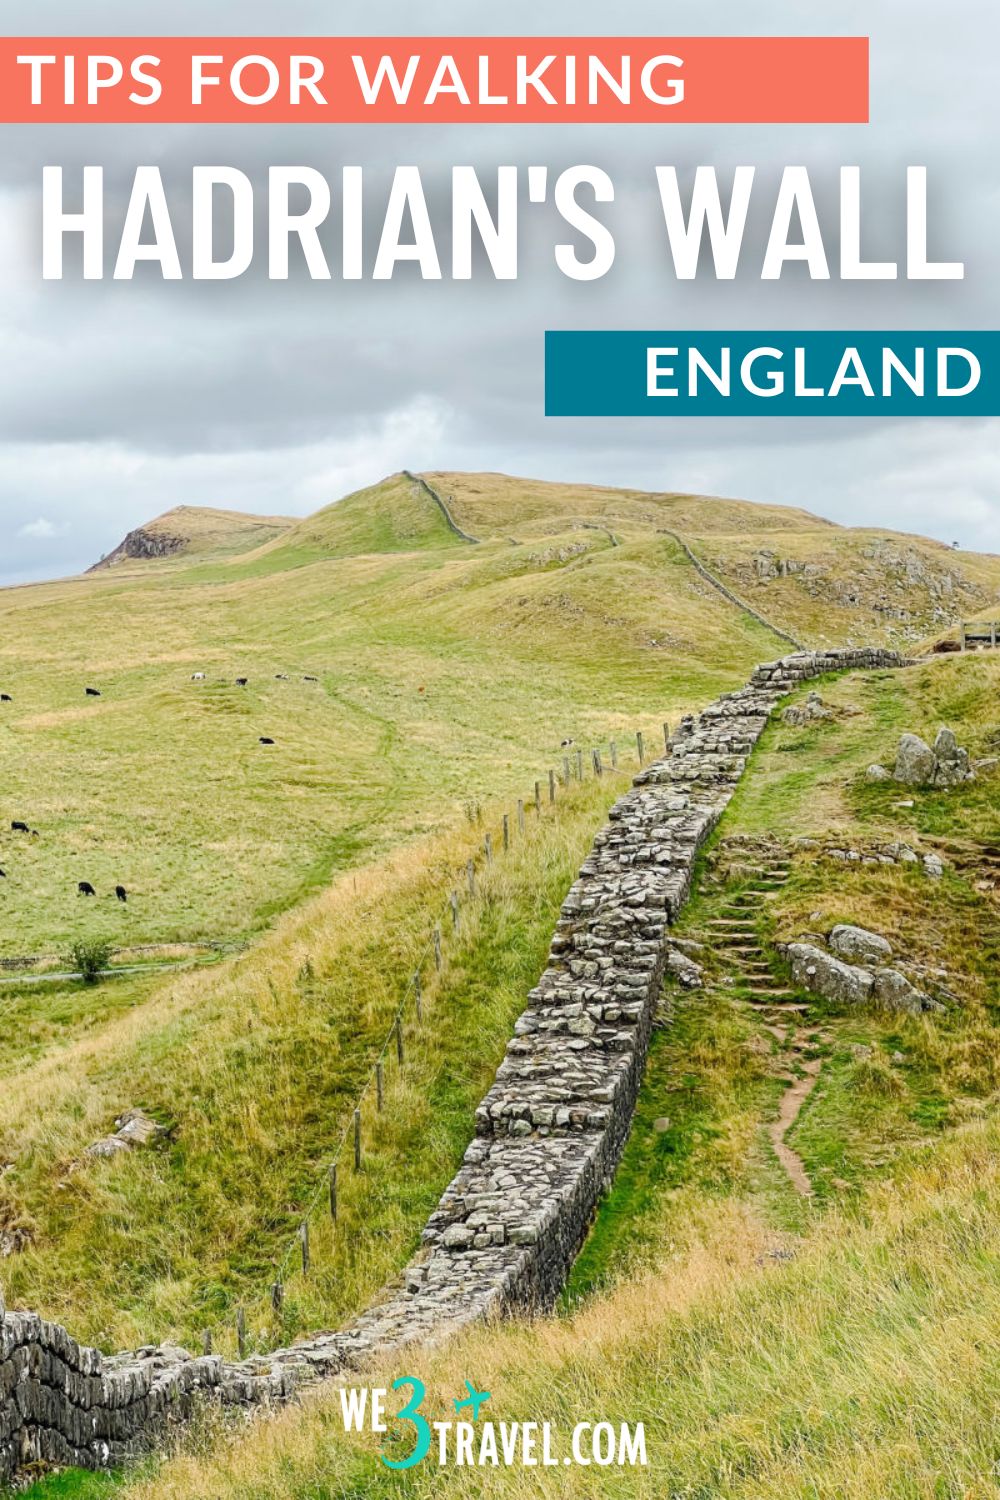 Tips for Walking Hadrian's Wall Path in Northern England - one of the United Kingdom's most popular walking holidays.